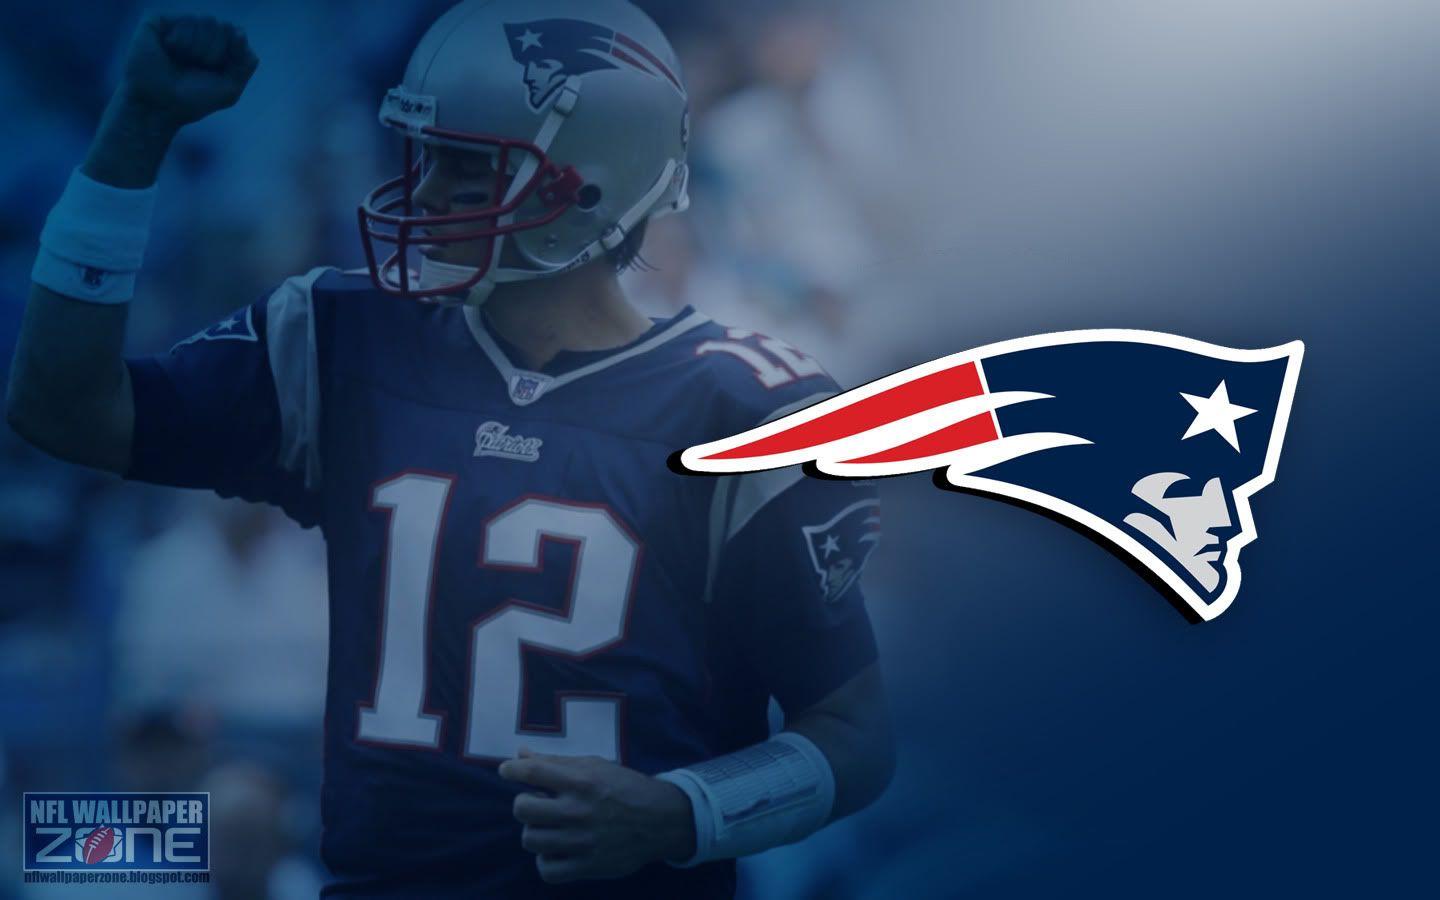 New England Patriots Wallpapers Photo by NFLWallpaperZone